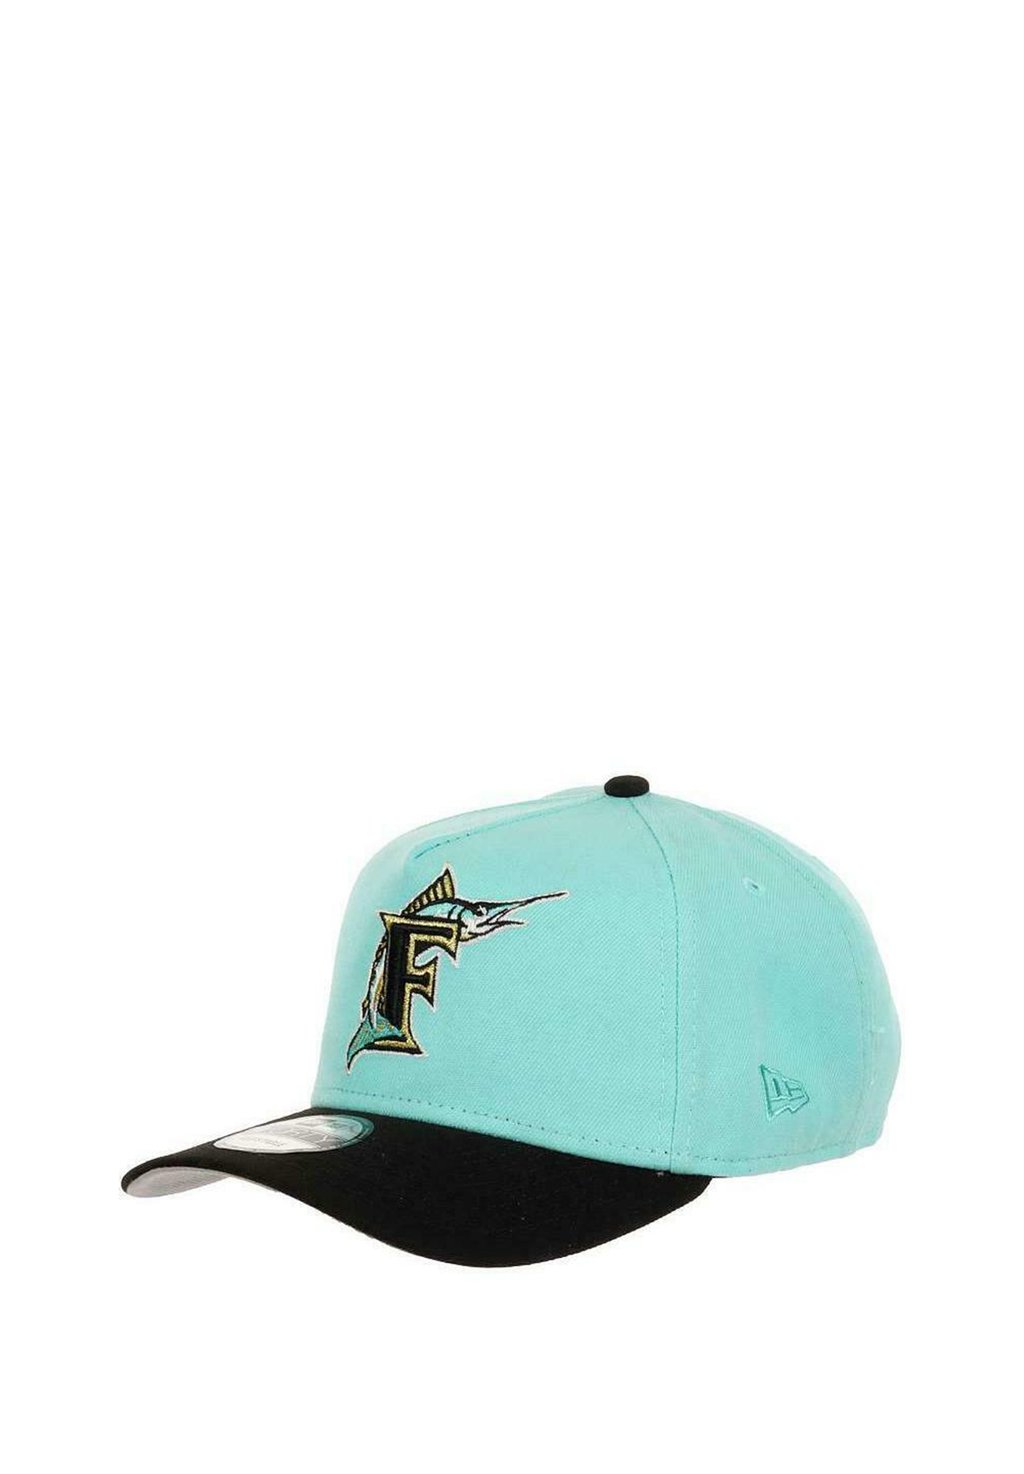 Бейсболка FLORIDA MARLINS MLB 10TH ANNIVERSARY SIDEPATCH COOPERSTOWN 9FORTY A-FRAME SNAPBACK New Era, цвет turquoise